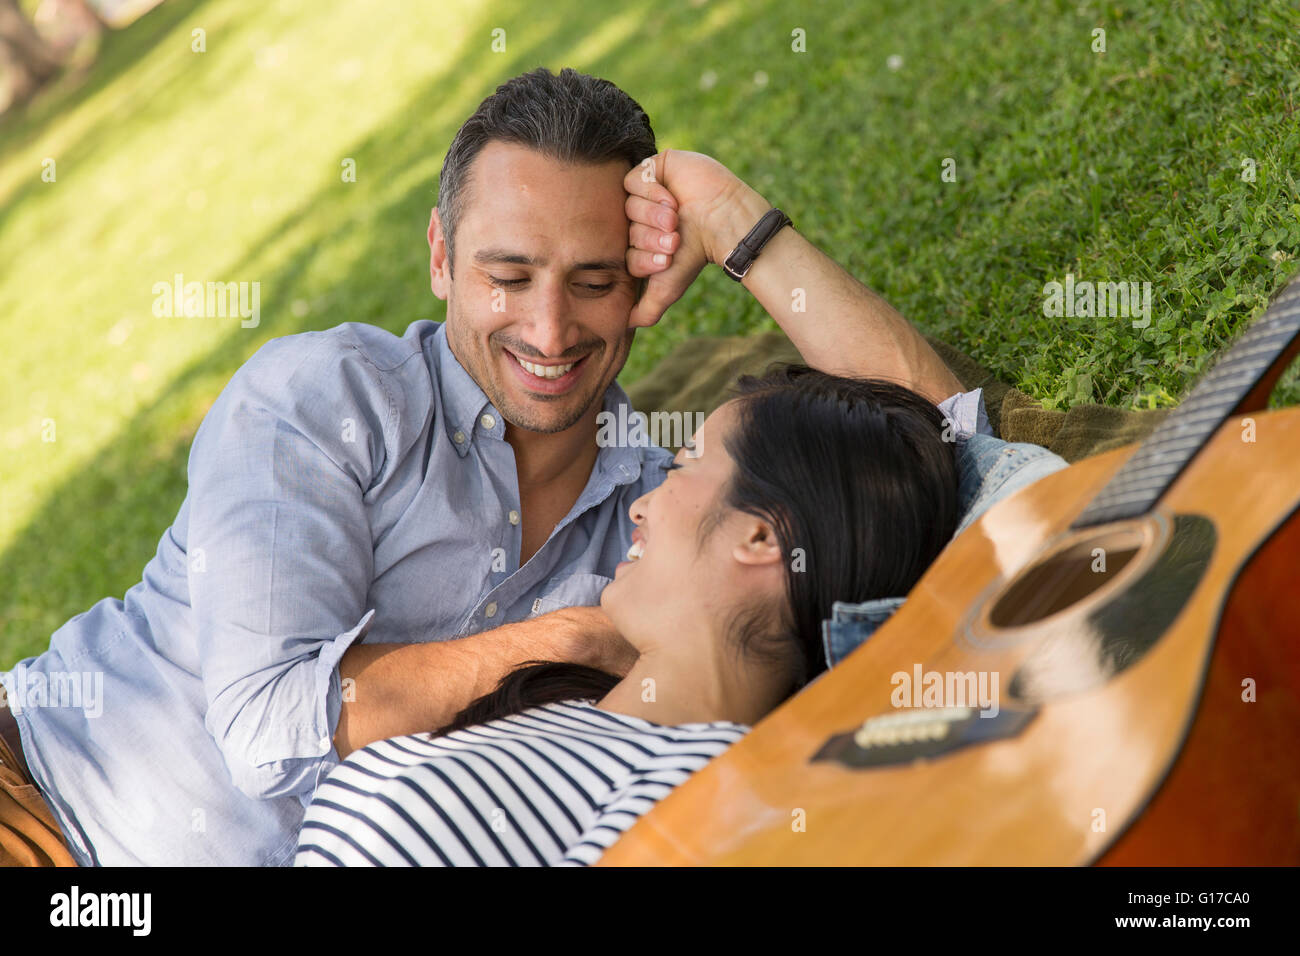 Couple lying on grass with acoustic guitar smiling Stock Photo